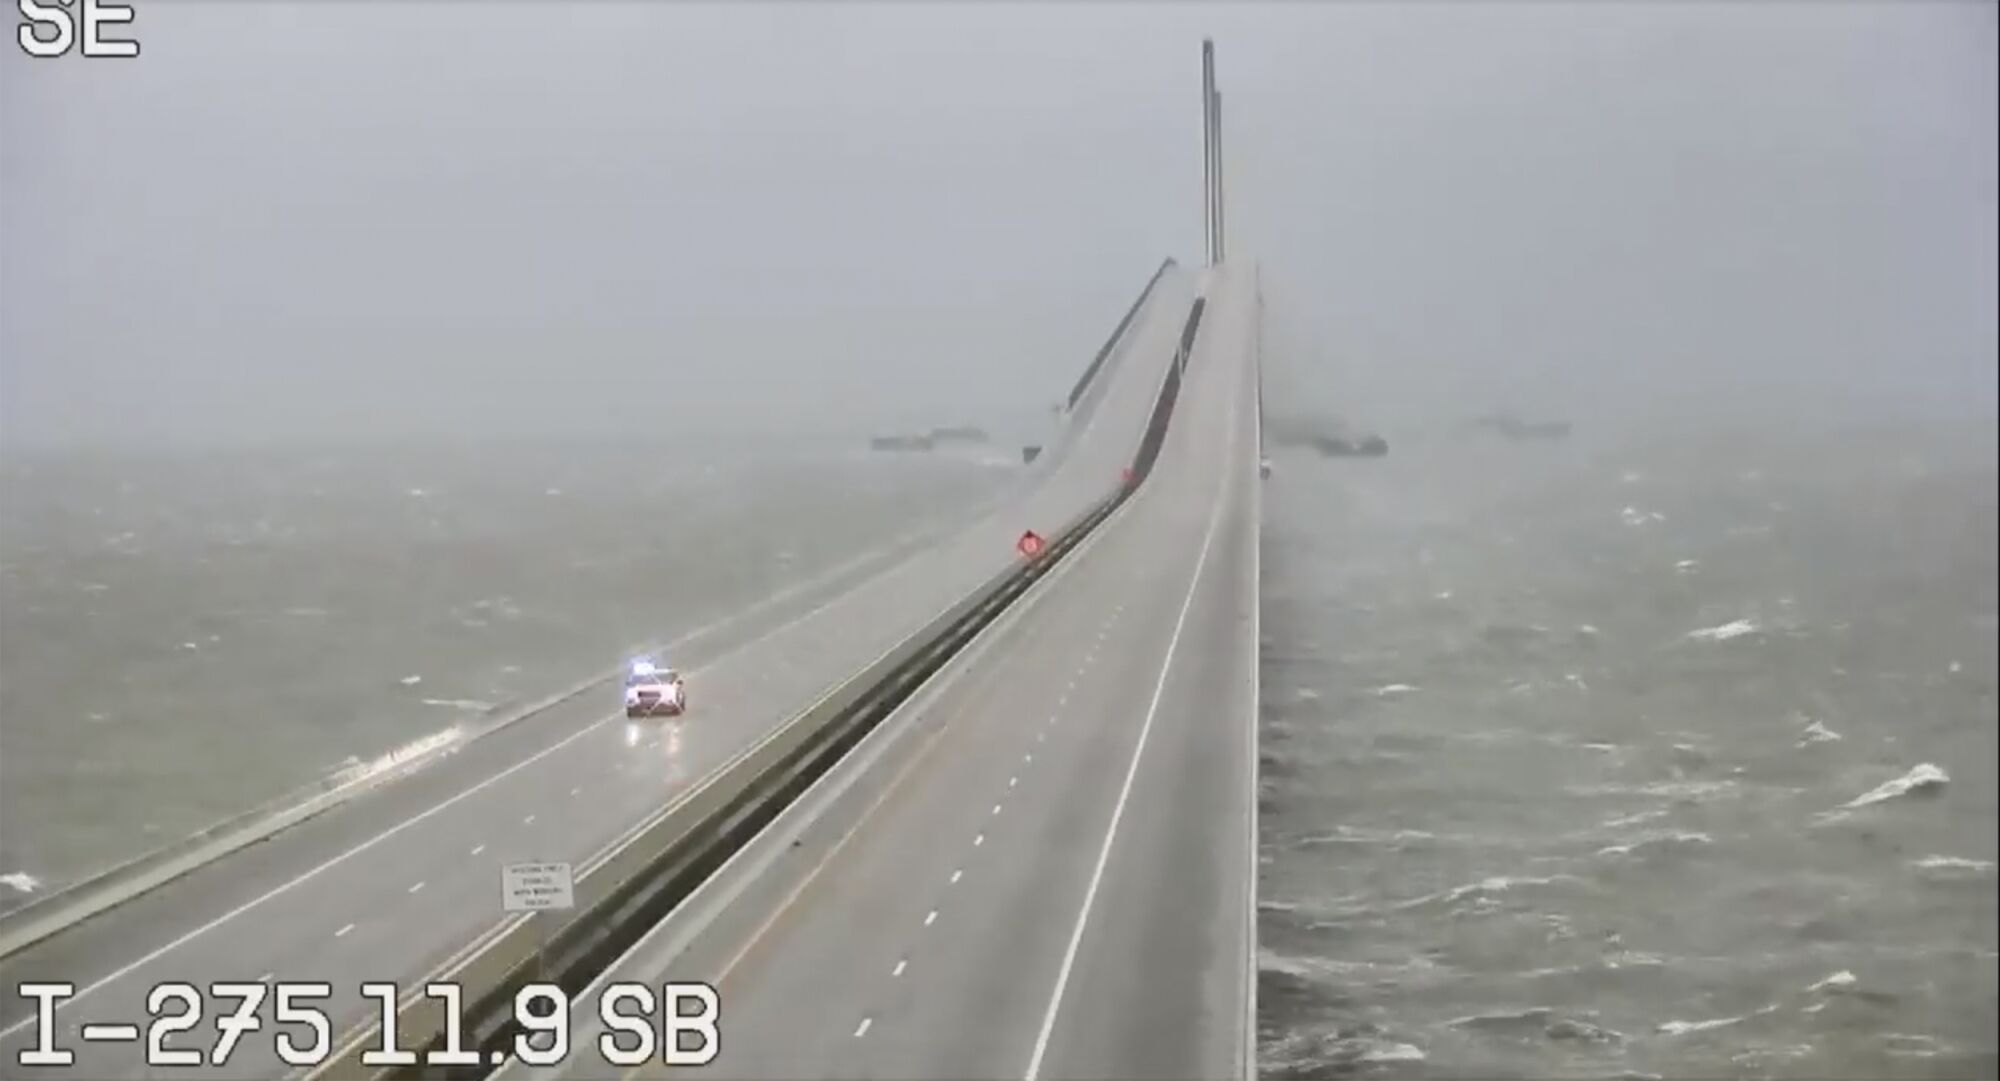 This image provided by FLDOT shows an emergency vehicle traveling on the Sunshine Skyway over Tampa Bay, Fla.